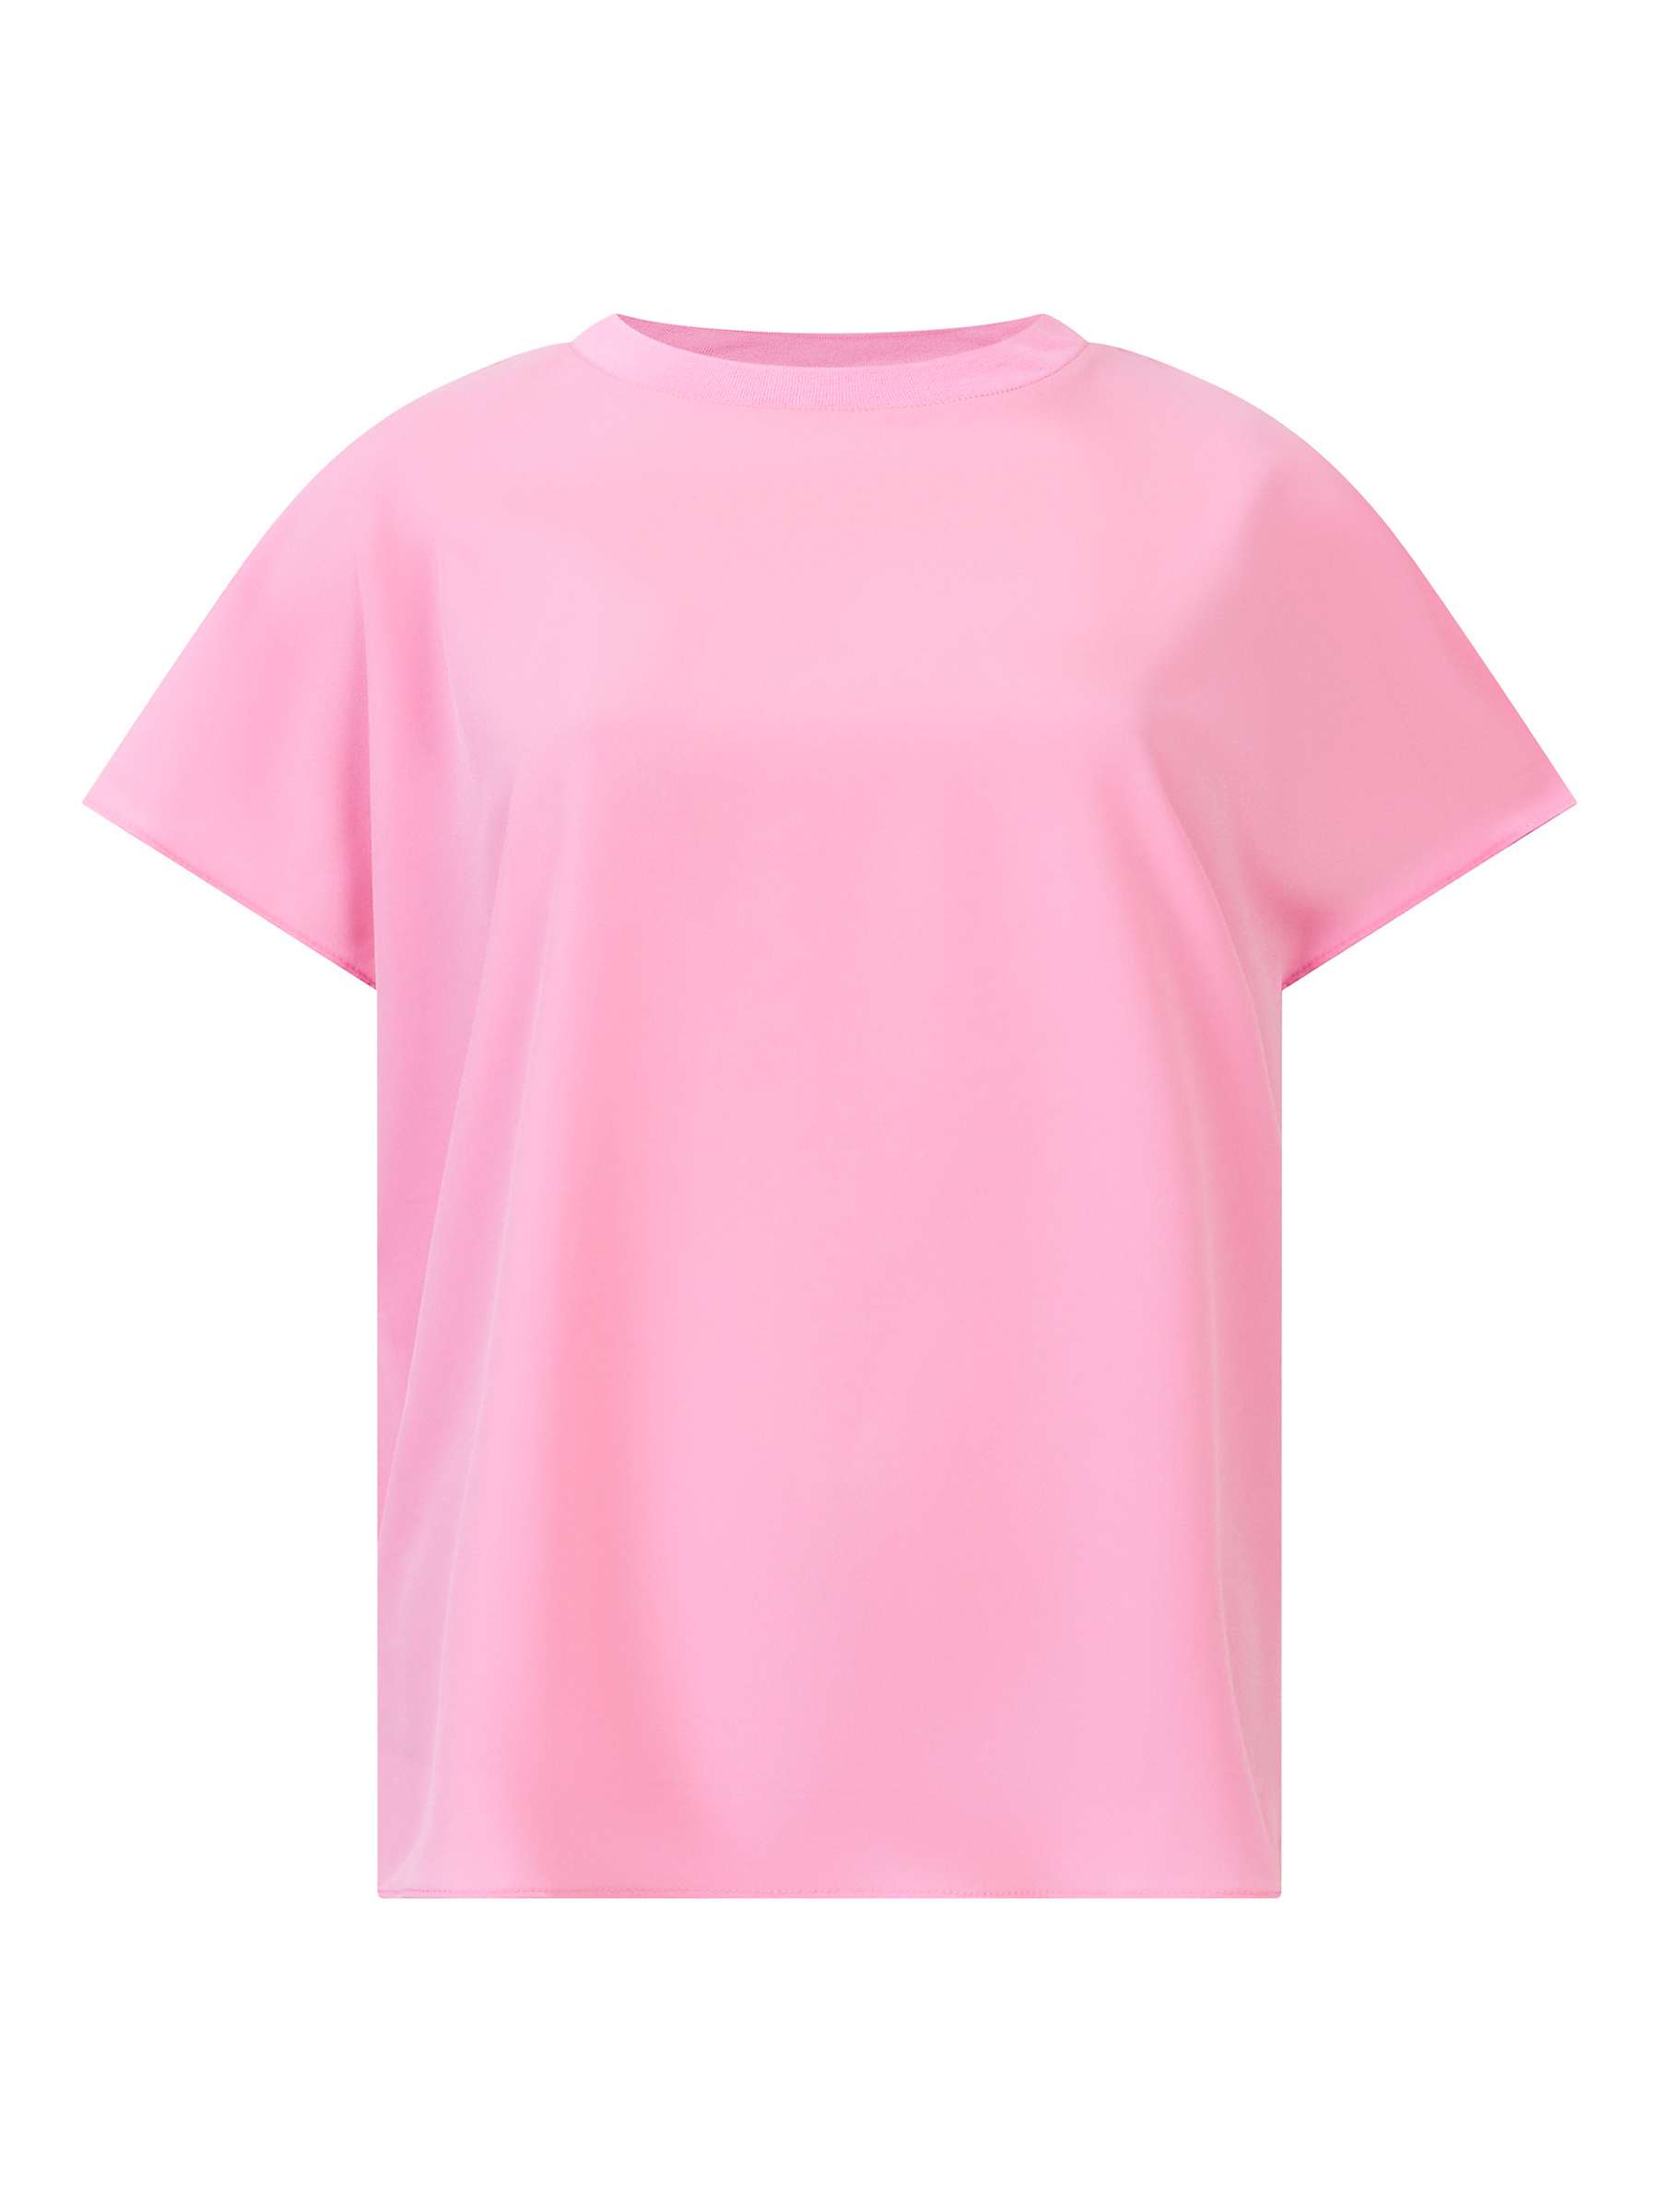 Buy French Connection Light Crepe Crew Neck Top Online at johnlewis.com